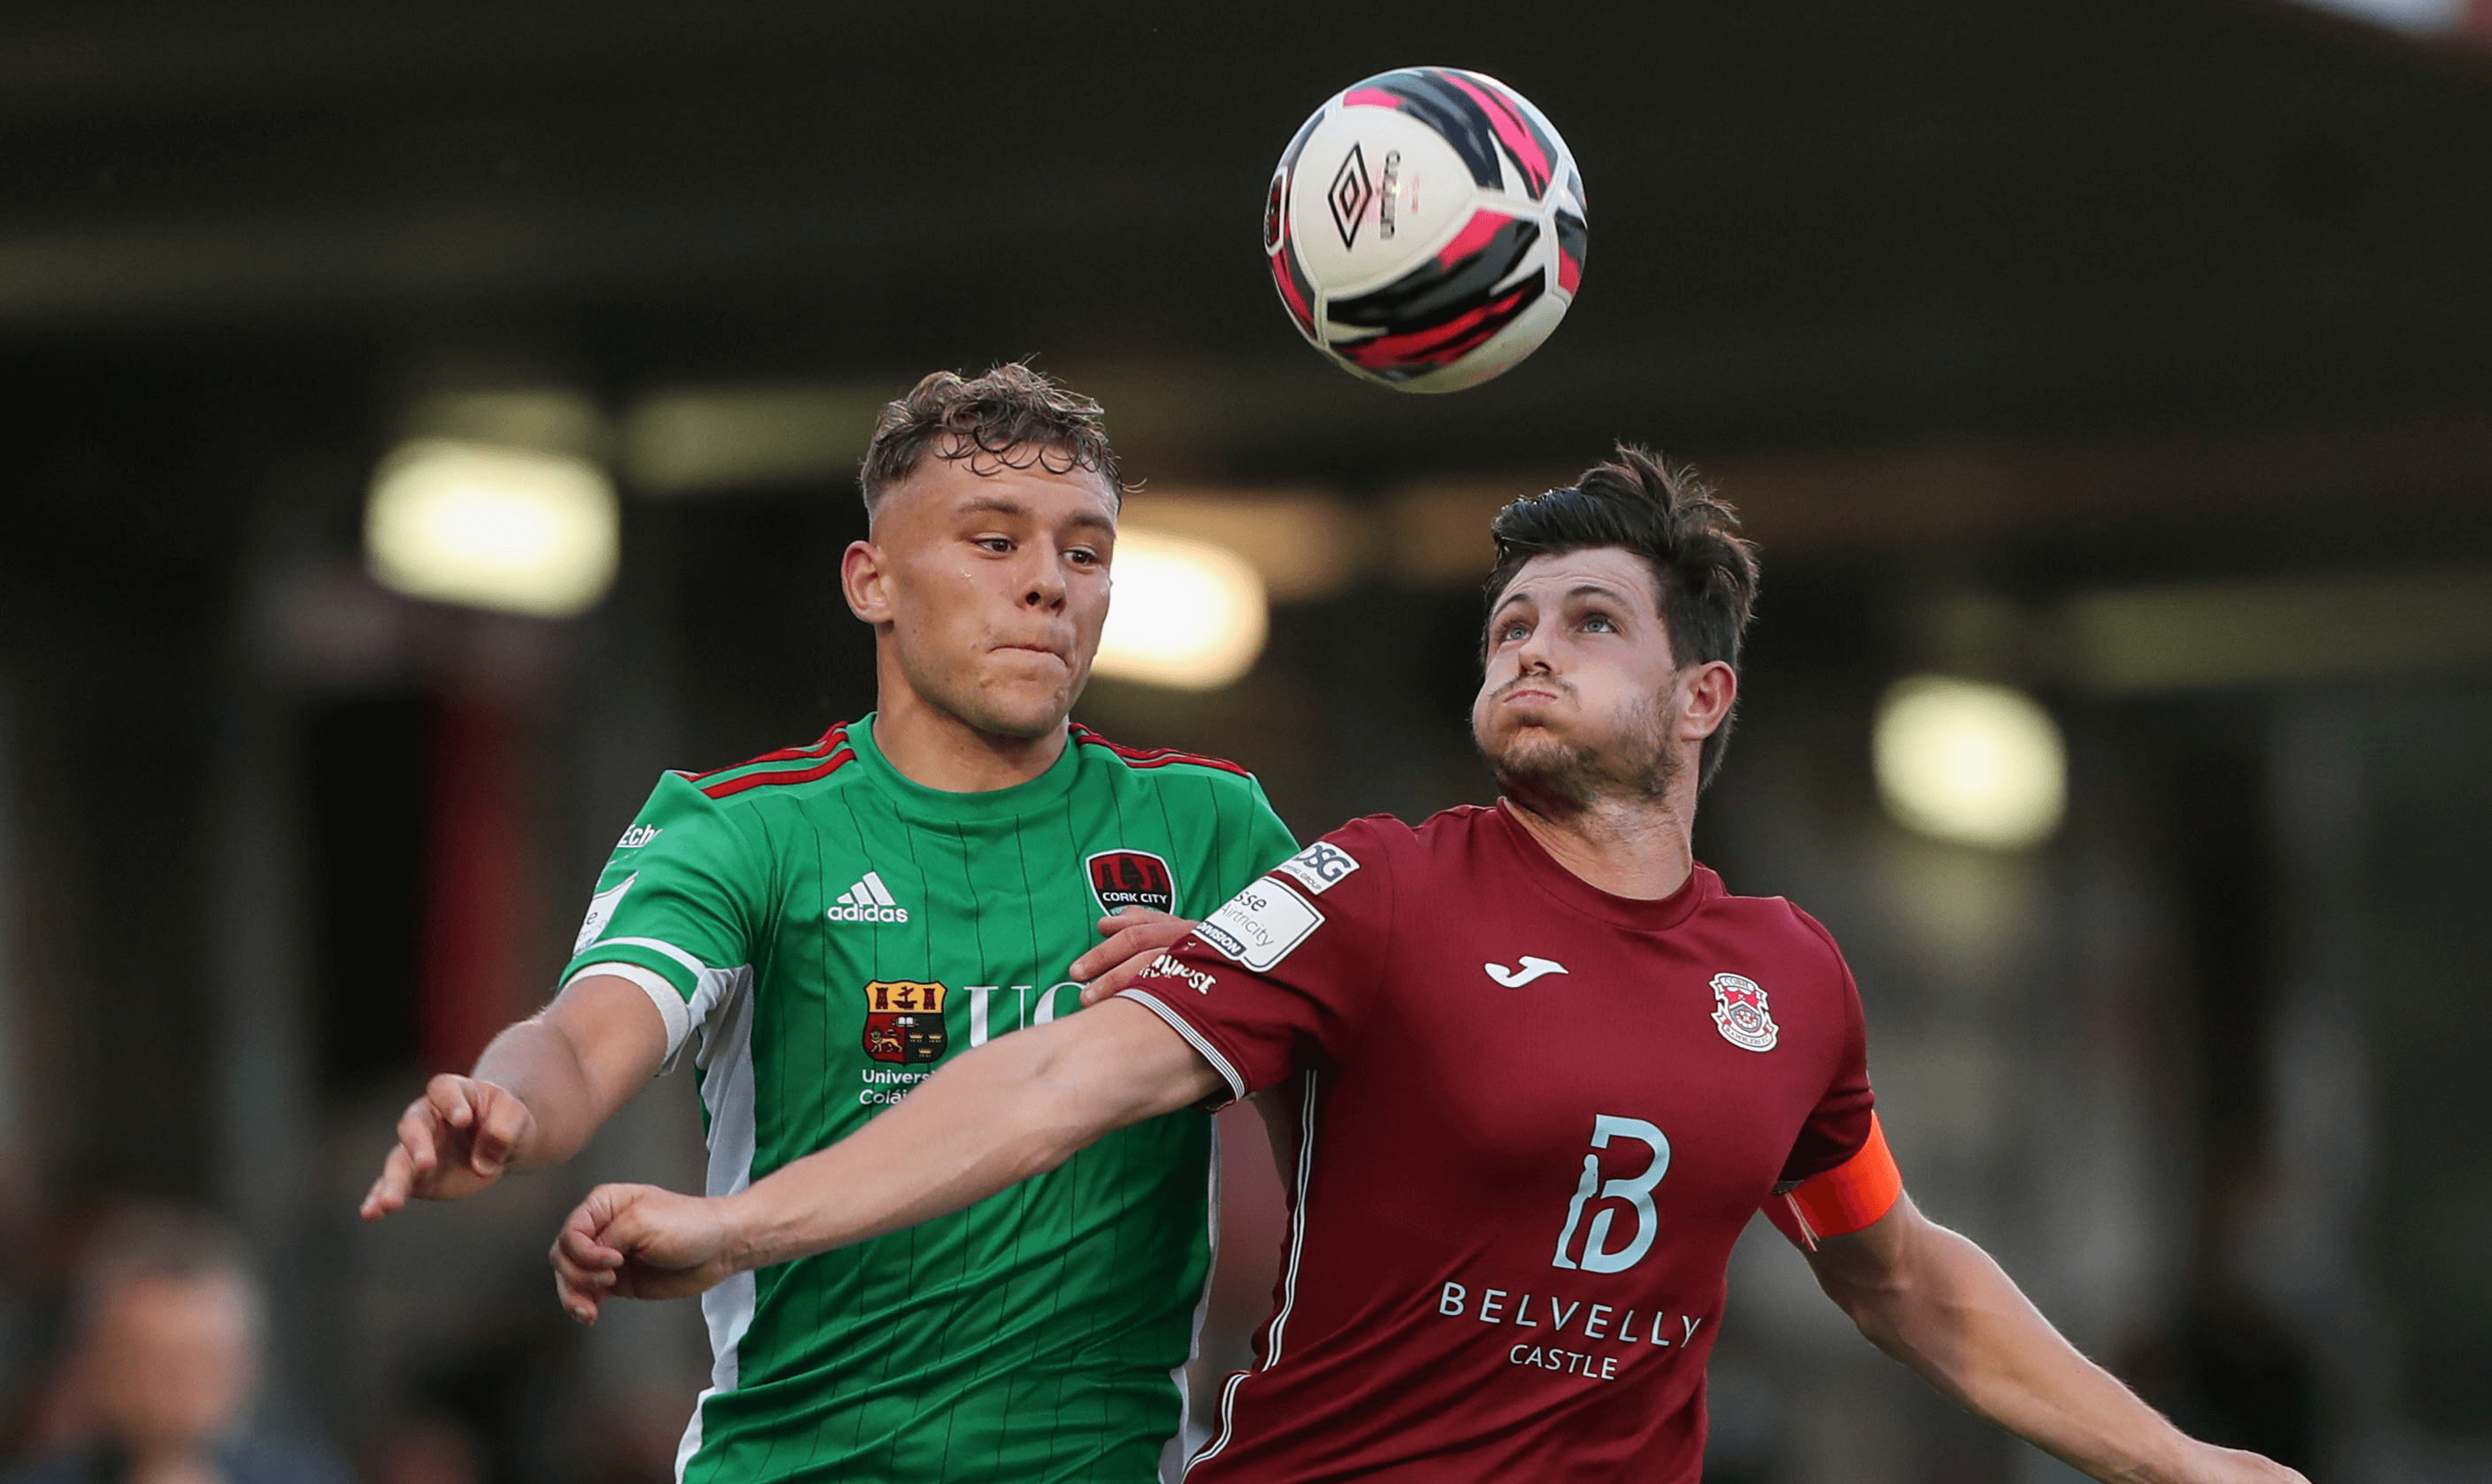 O'Brien-Whitmarsh signs for Cobh Ramblers